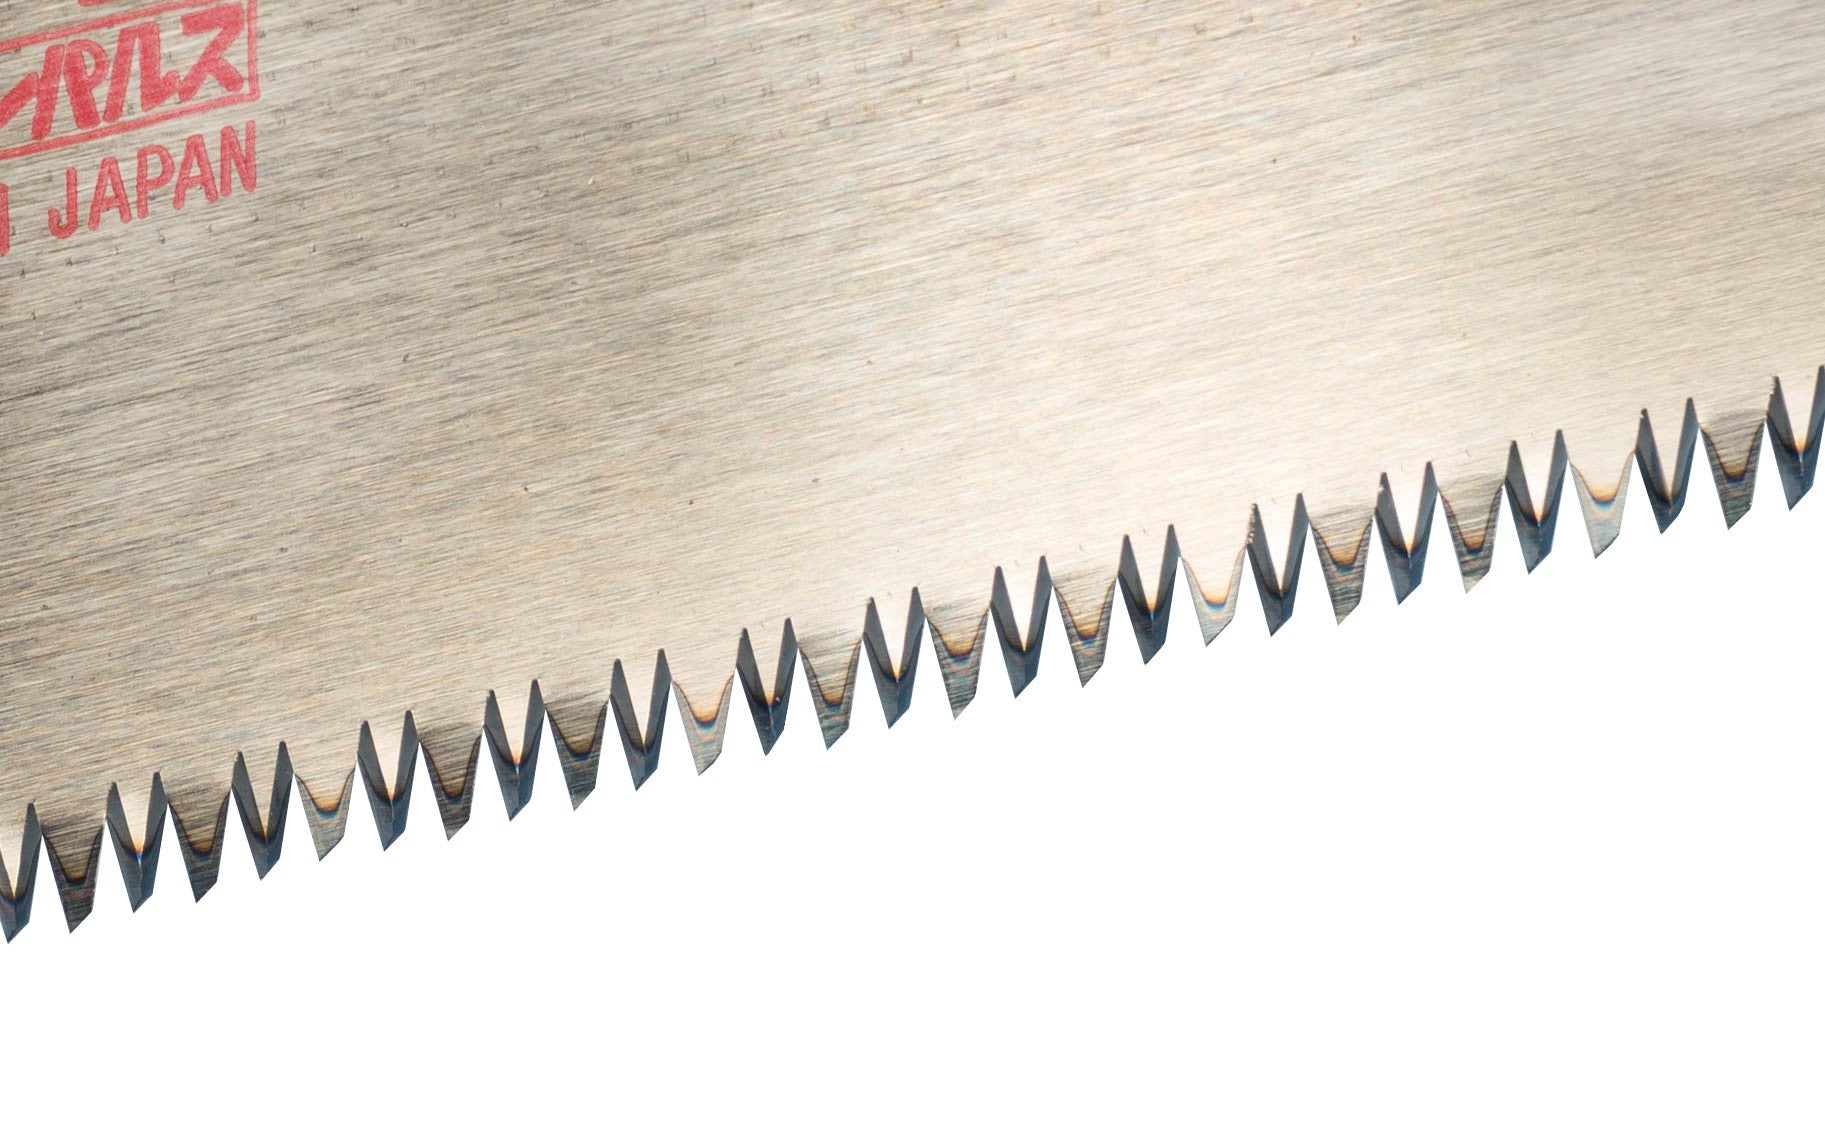 Made in Japan Z-Saw #H-300 | #15011 ~ Crosscut Teeth: 13 TPI ~ Coarse & fast cutting pull-saw ~ Impulse Hardened Teeth ~ Blade is removable ~ For general purpose rough work, house framing, or a quick cut off for 2 x 4 or 2 x 8 materials. It is a good saw for general lumber, soft & hardwoods, laminate board & plywood